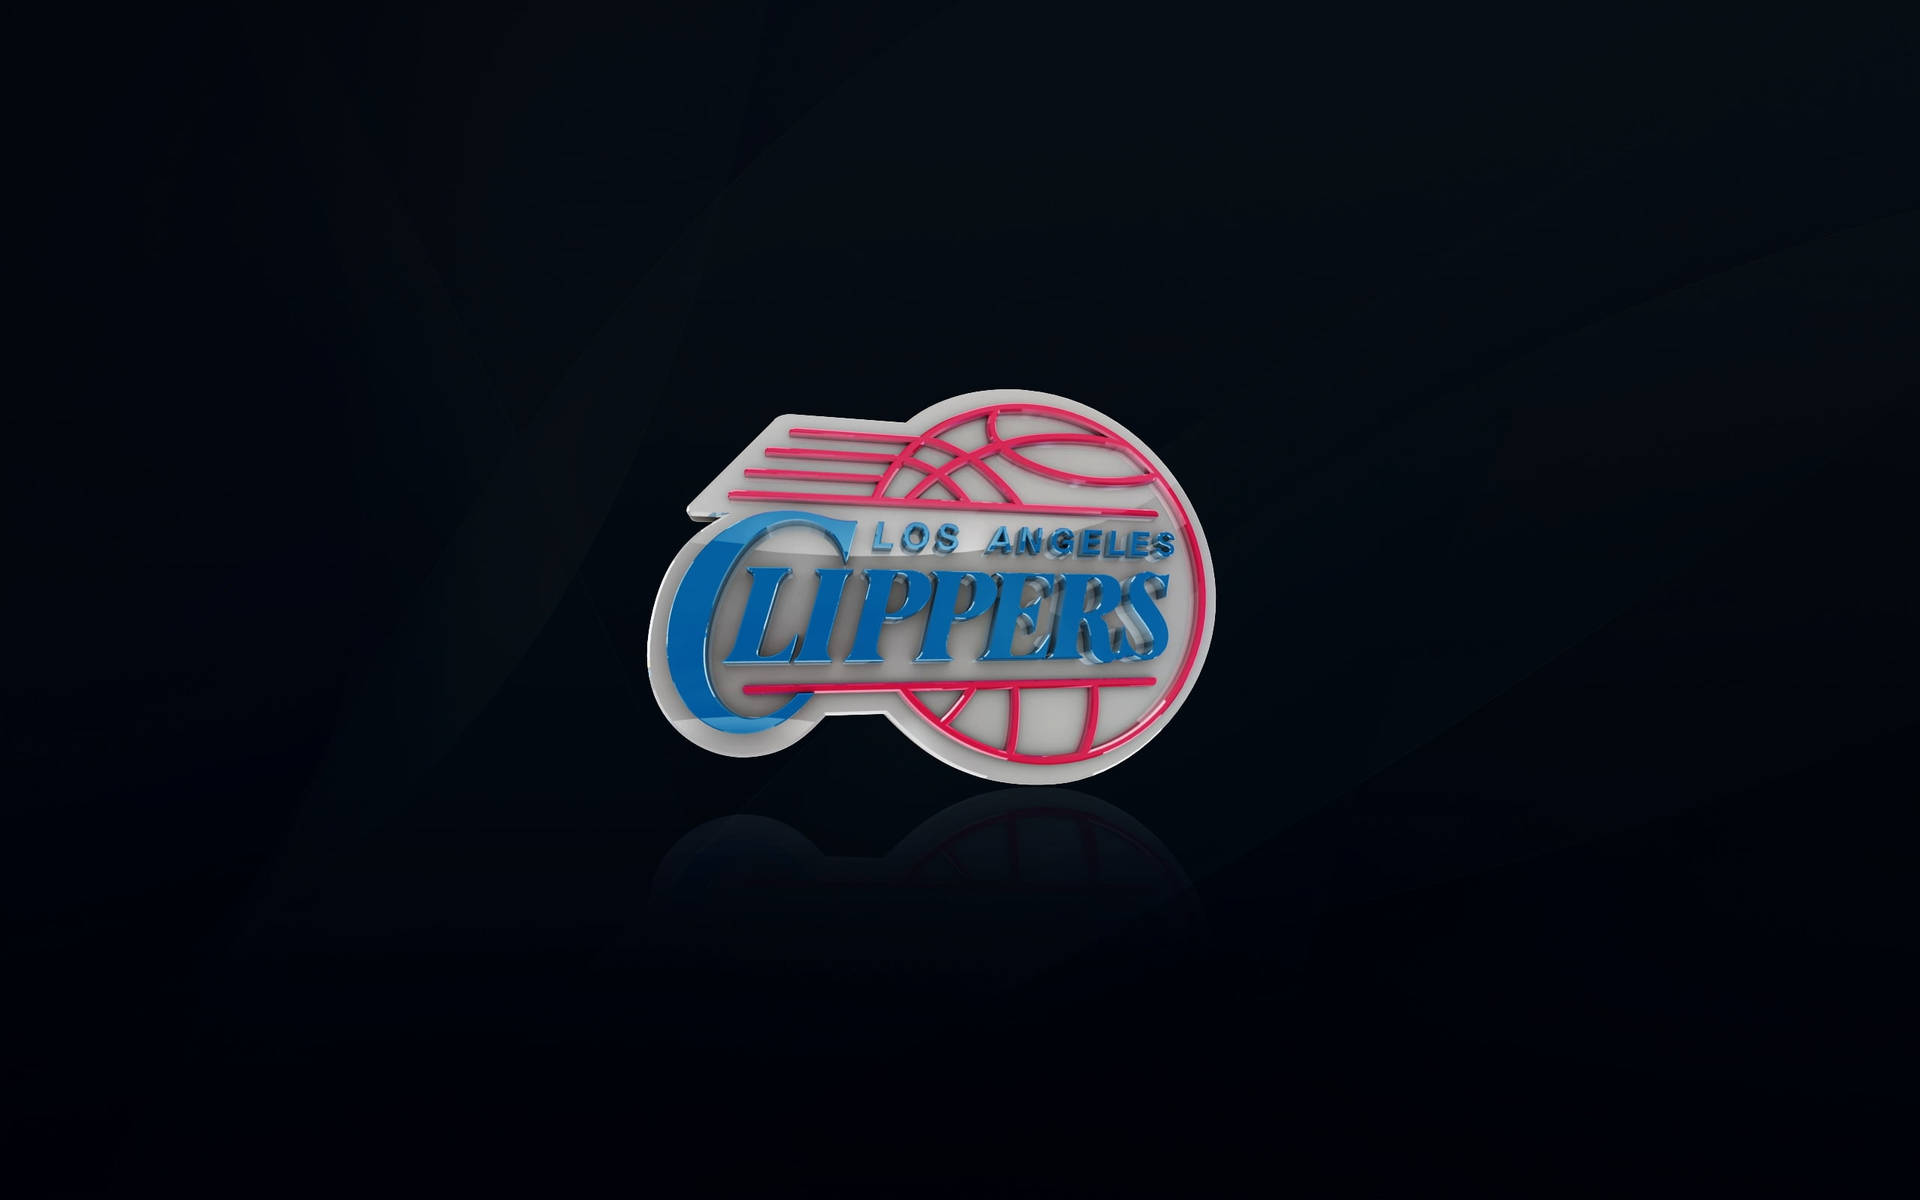 Los Angeles Clippers Glared Logo Background